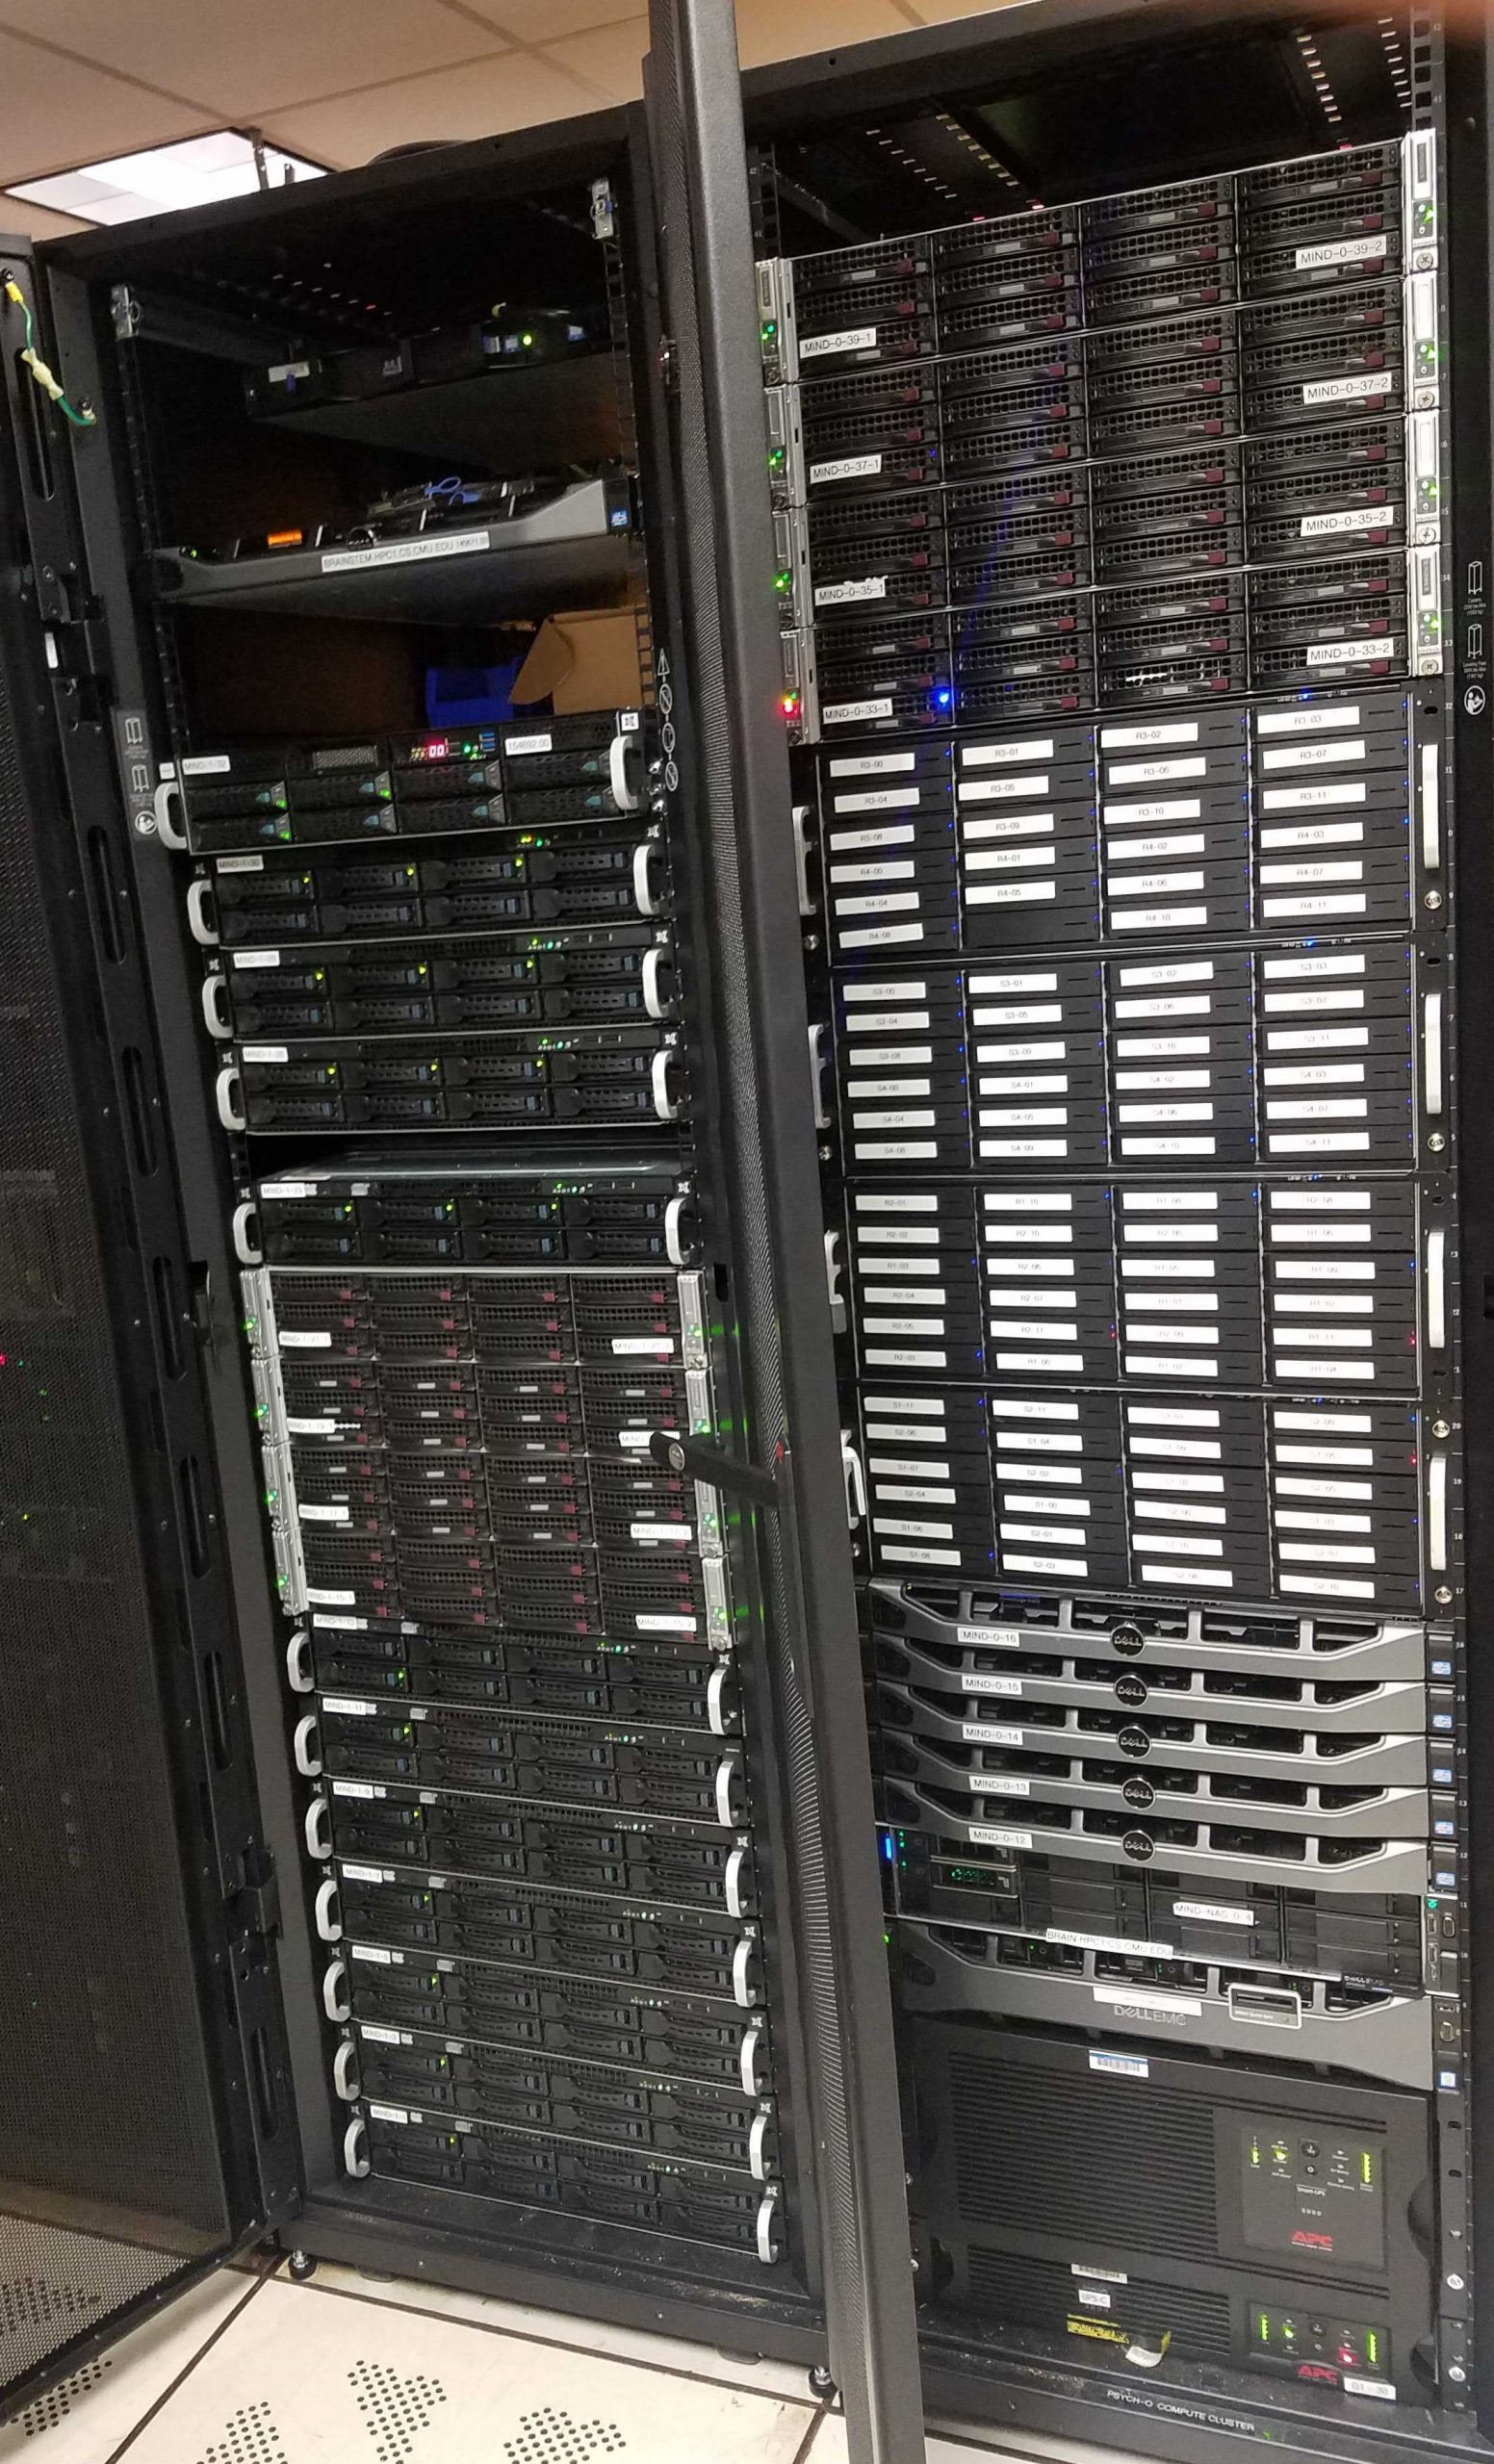 cnbc cluster